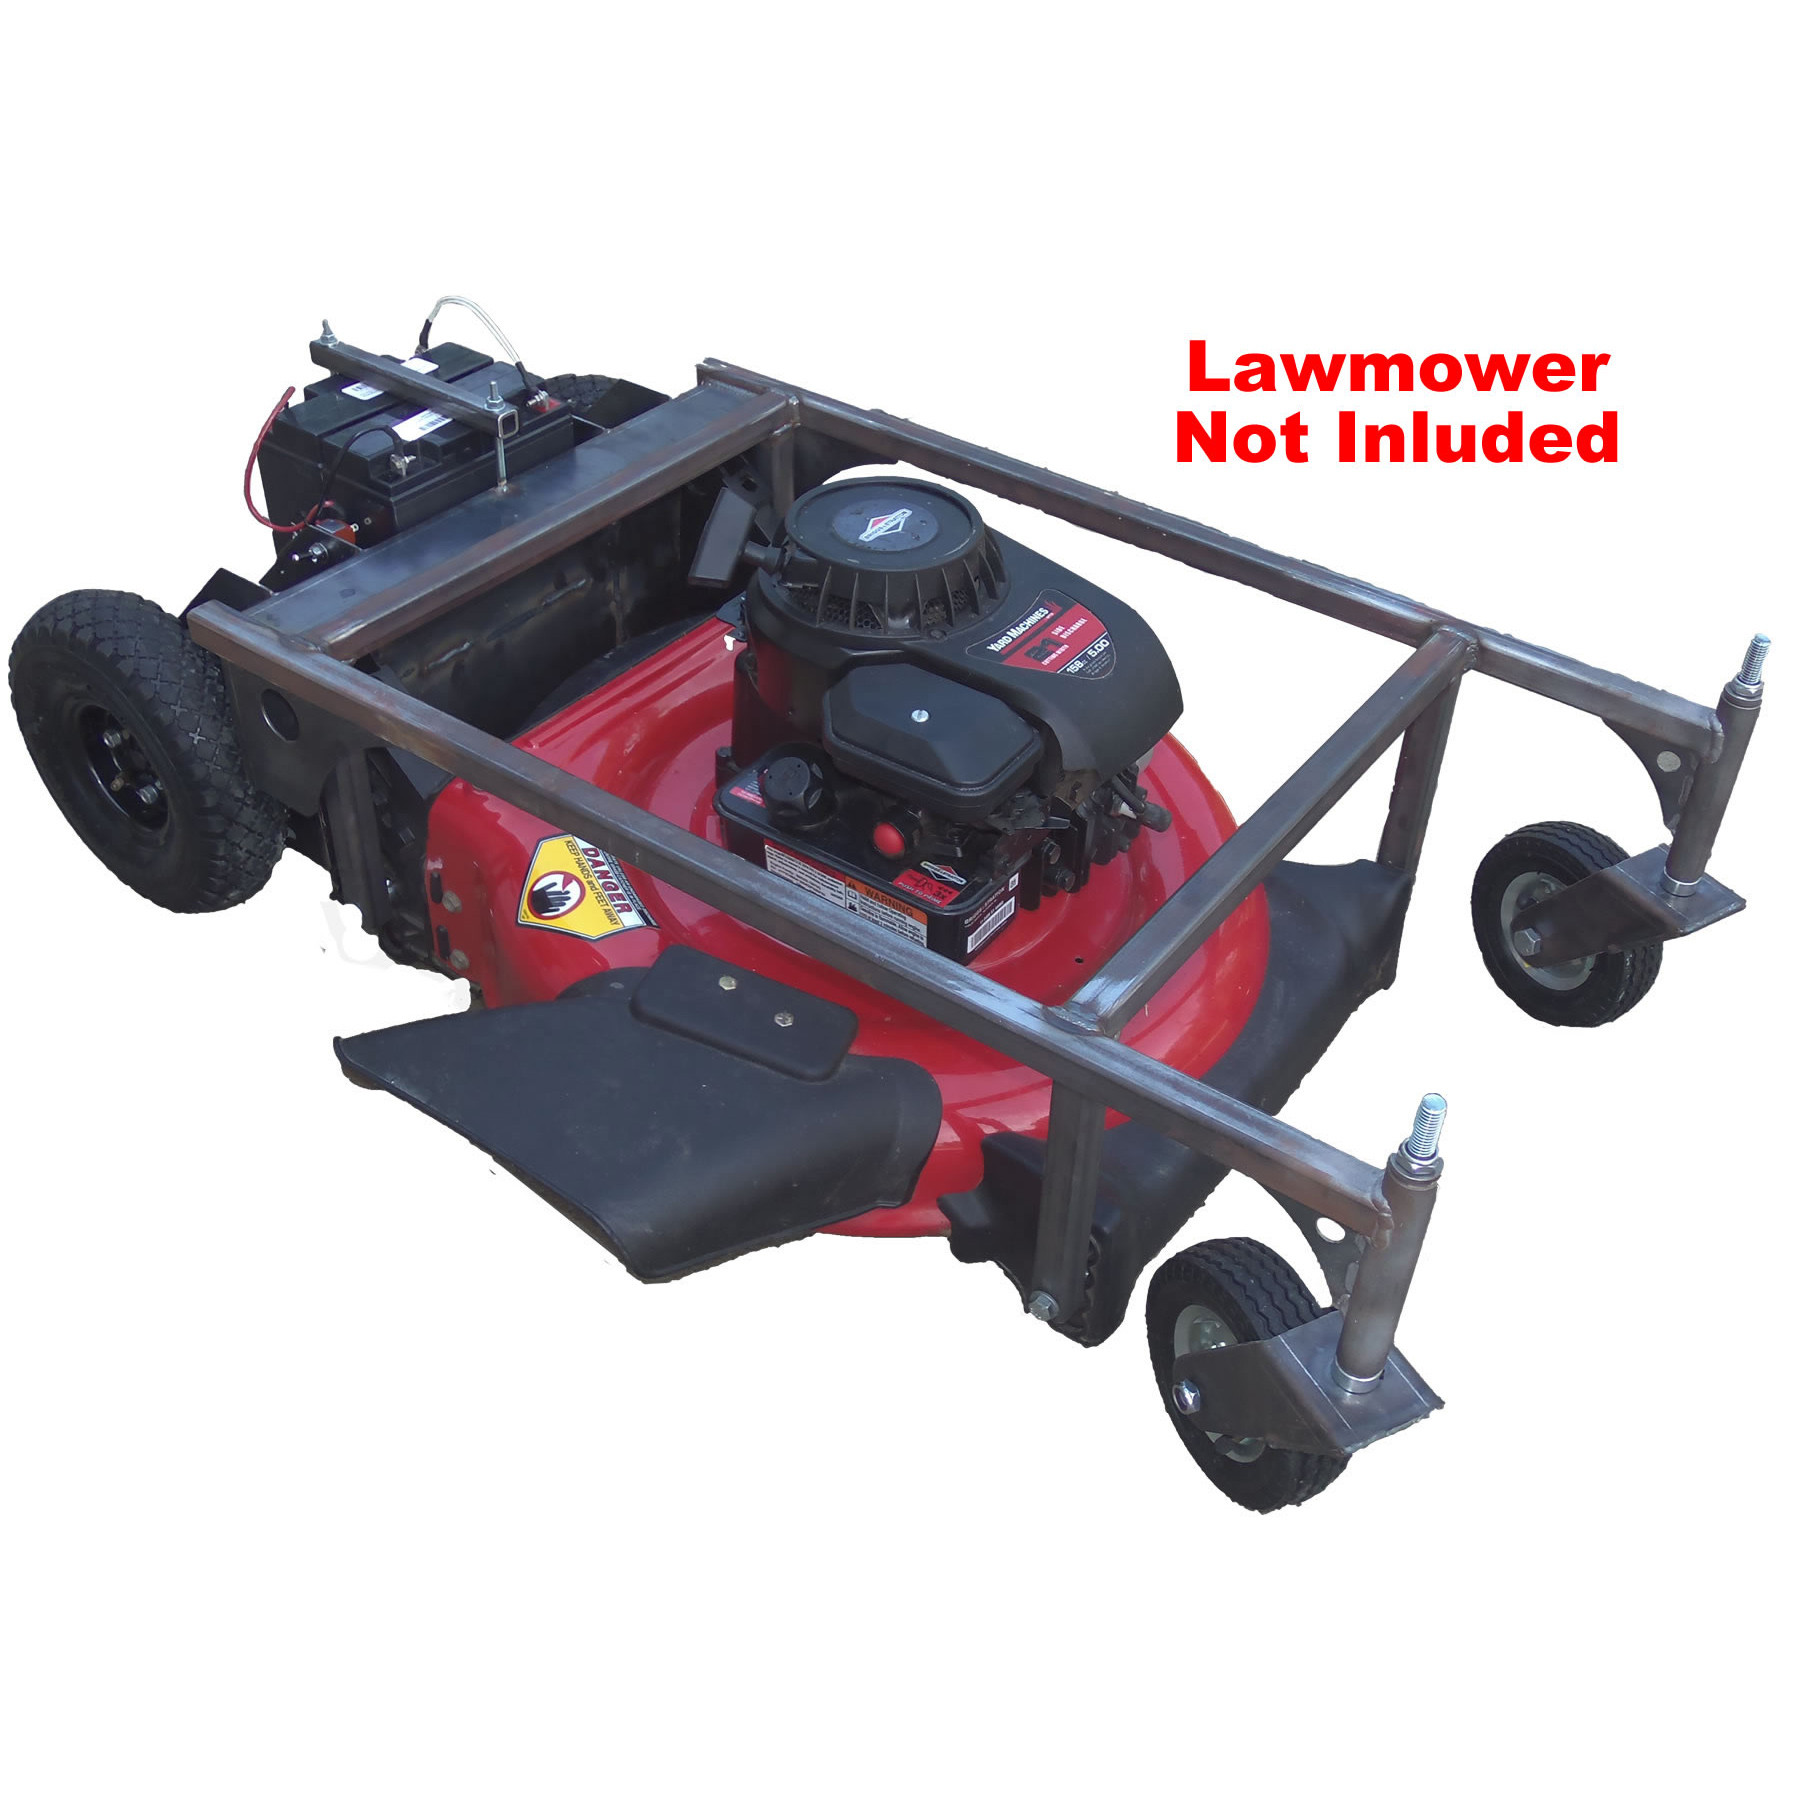 DIY Remote Control Lawn Mower Kit
 Lawn Mower Chassis Upfit Robot Package IG52 DB